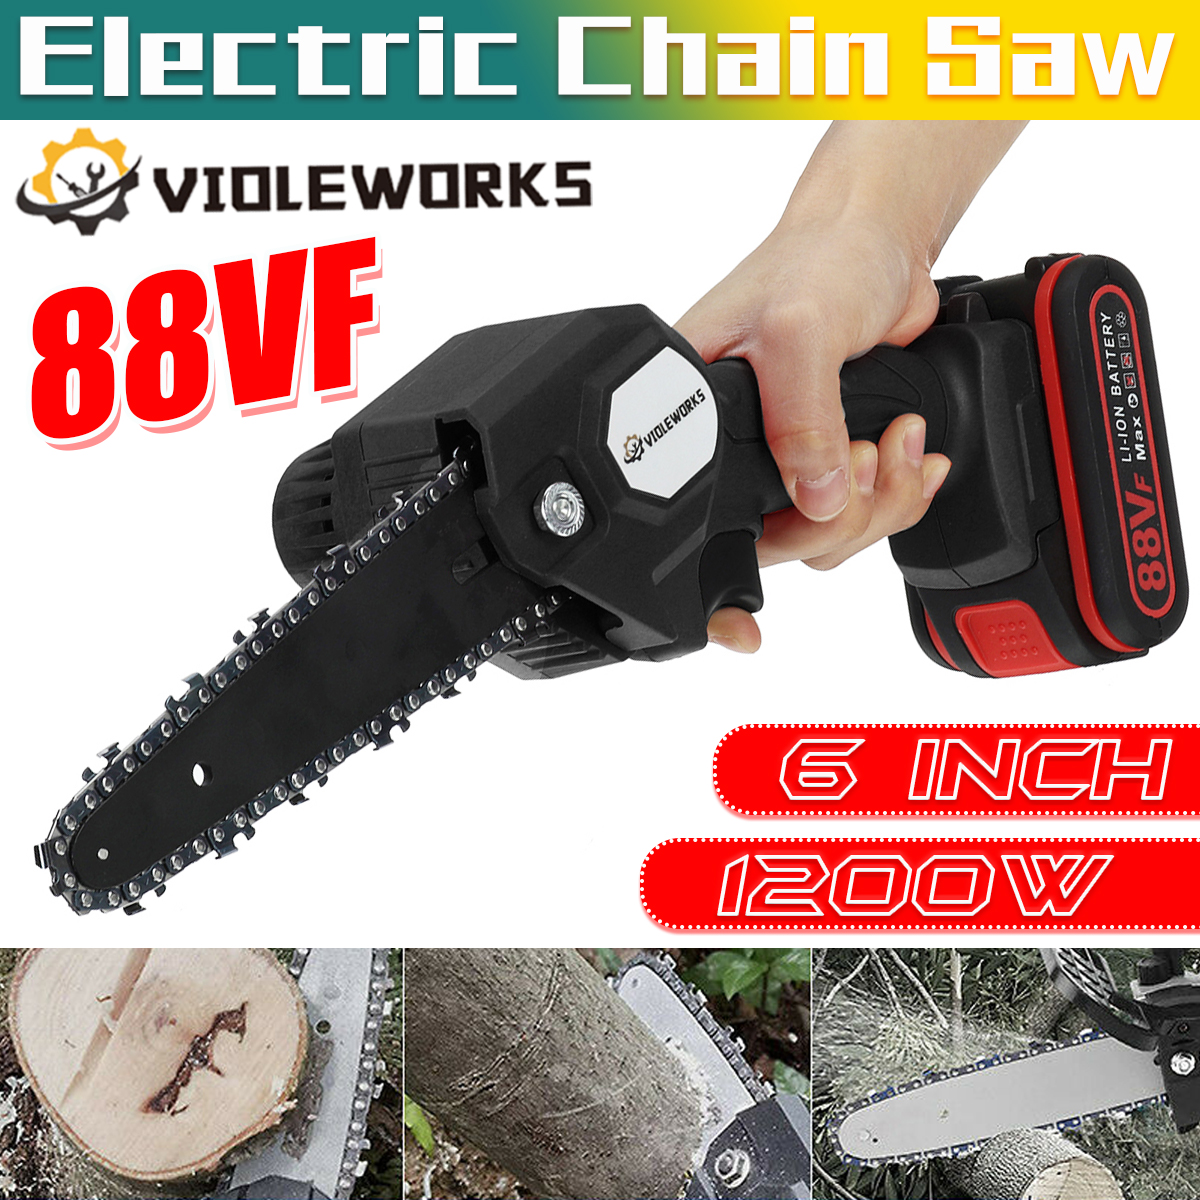 88VF-1200W-6Inch-Electric-Cordless-One-Hand-Saw-Chain-Saw-Woodworking-Tool-Kit-W-2pcs-Battery-1830645-2